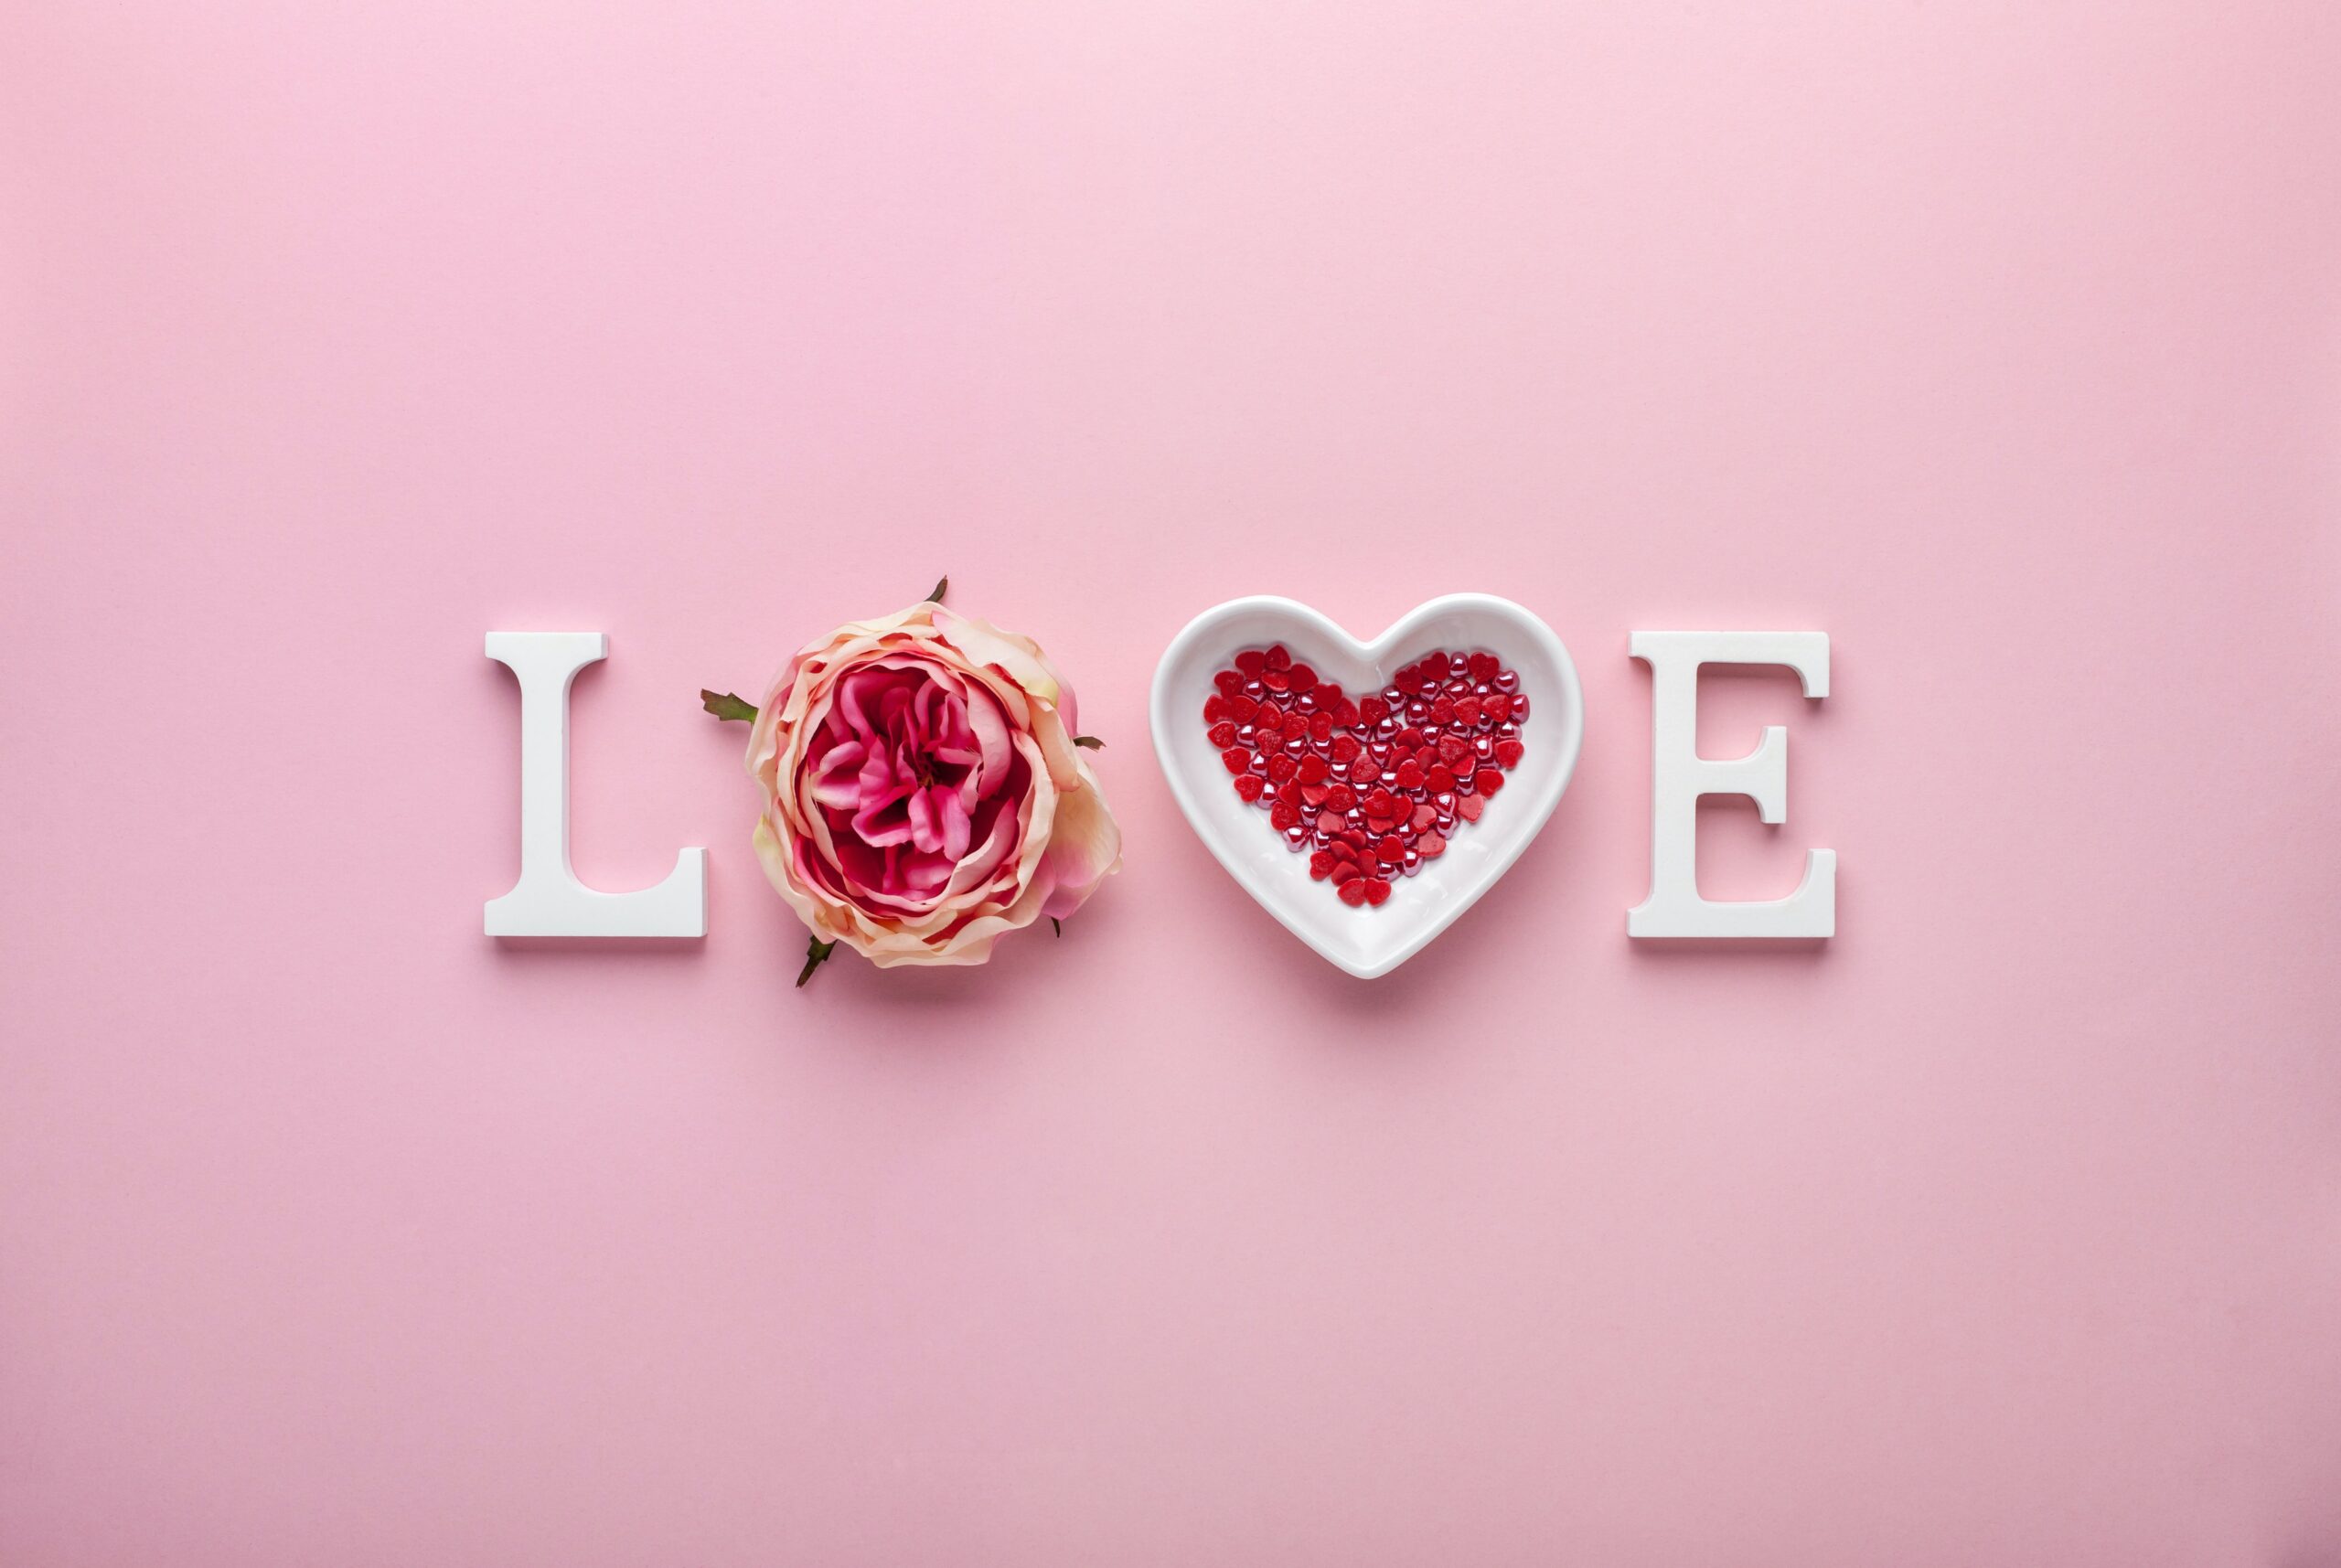 The word love spelt out on pink background